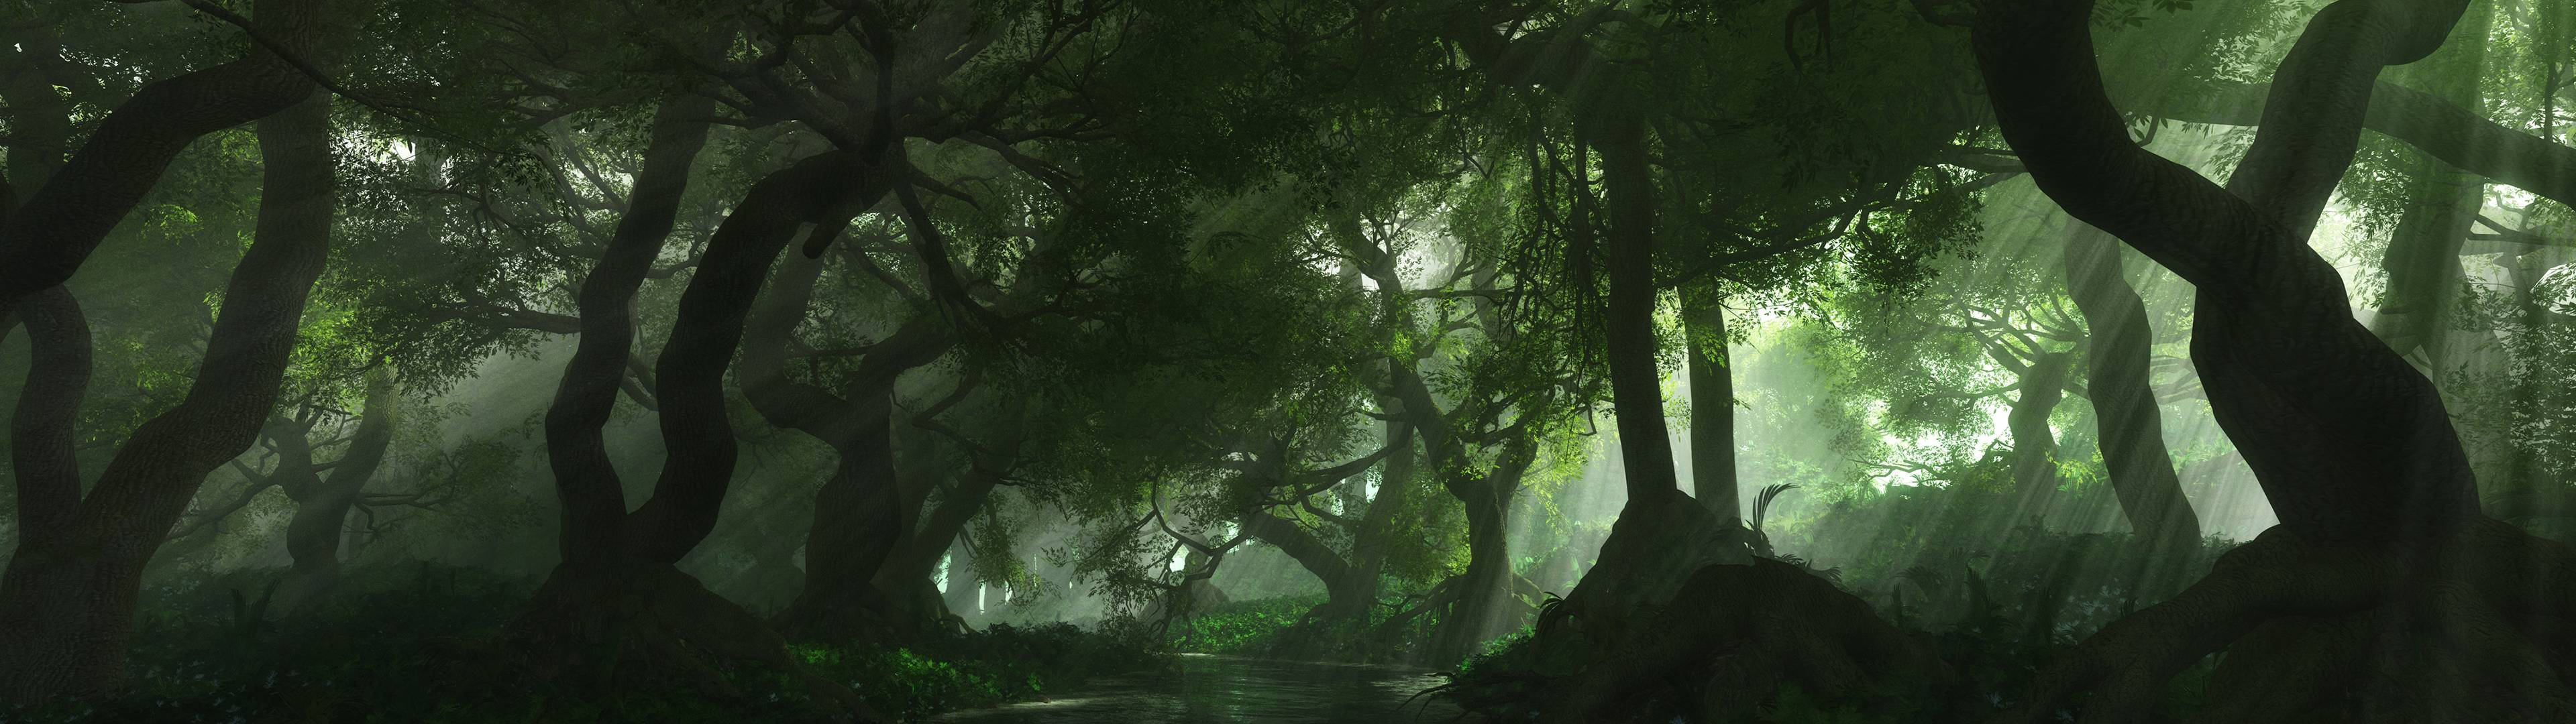 3840x1080 Hd Dual Monitor Forest